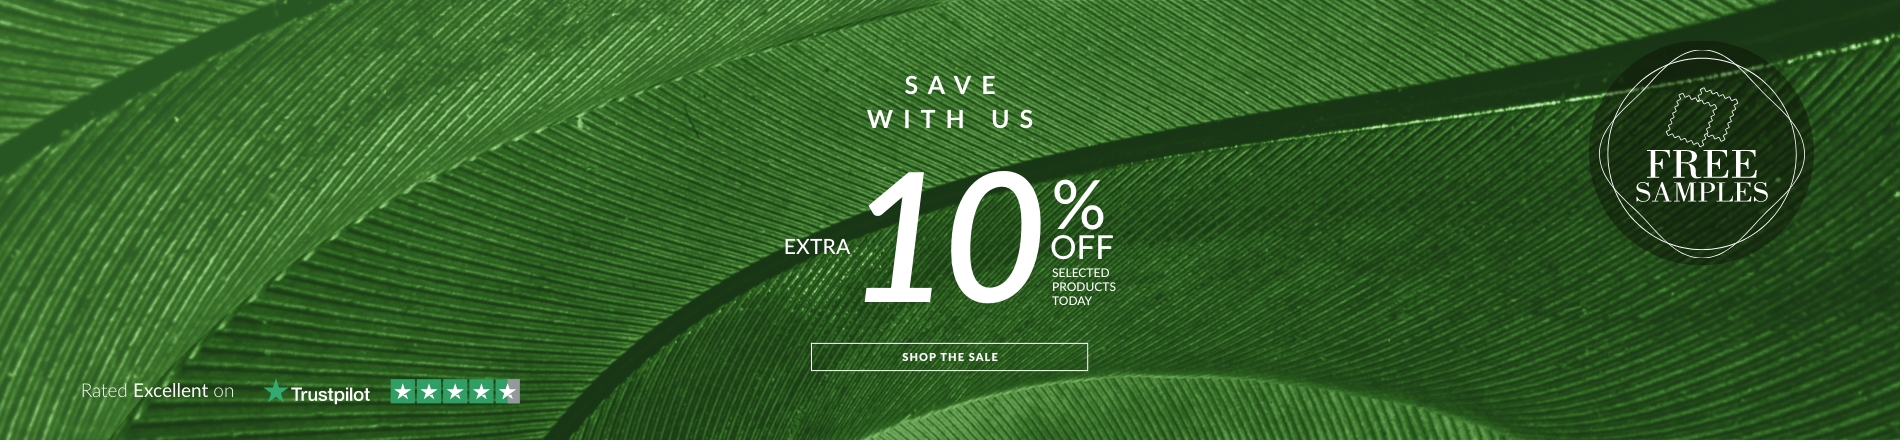 Shutters 10% May 22